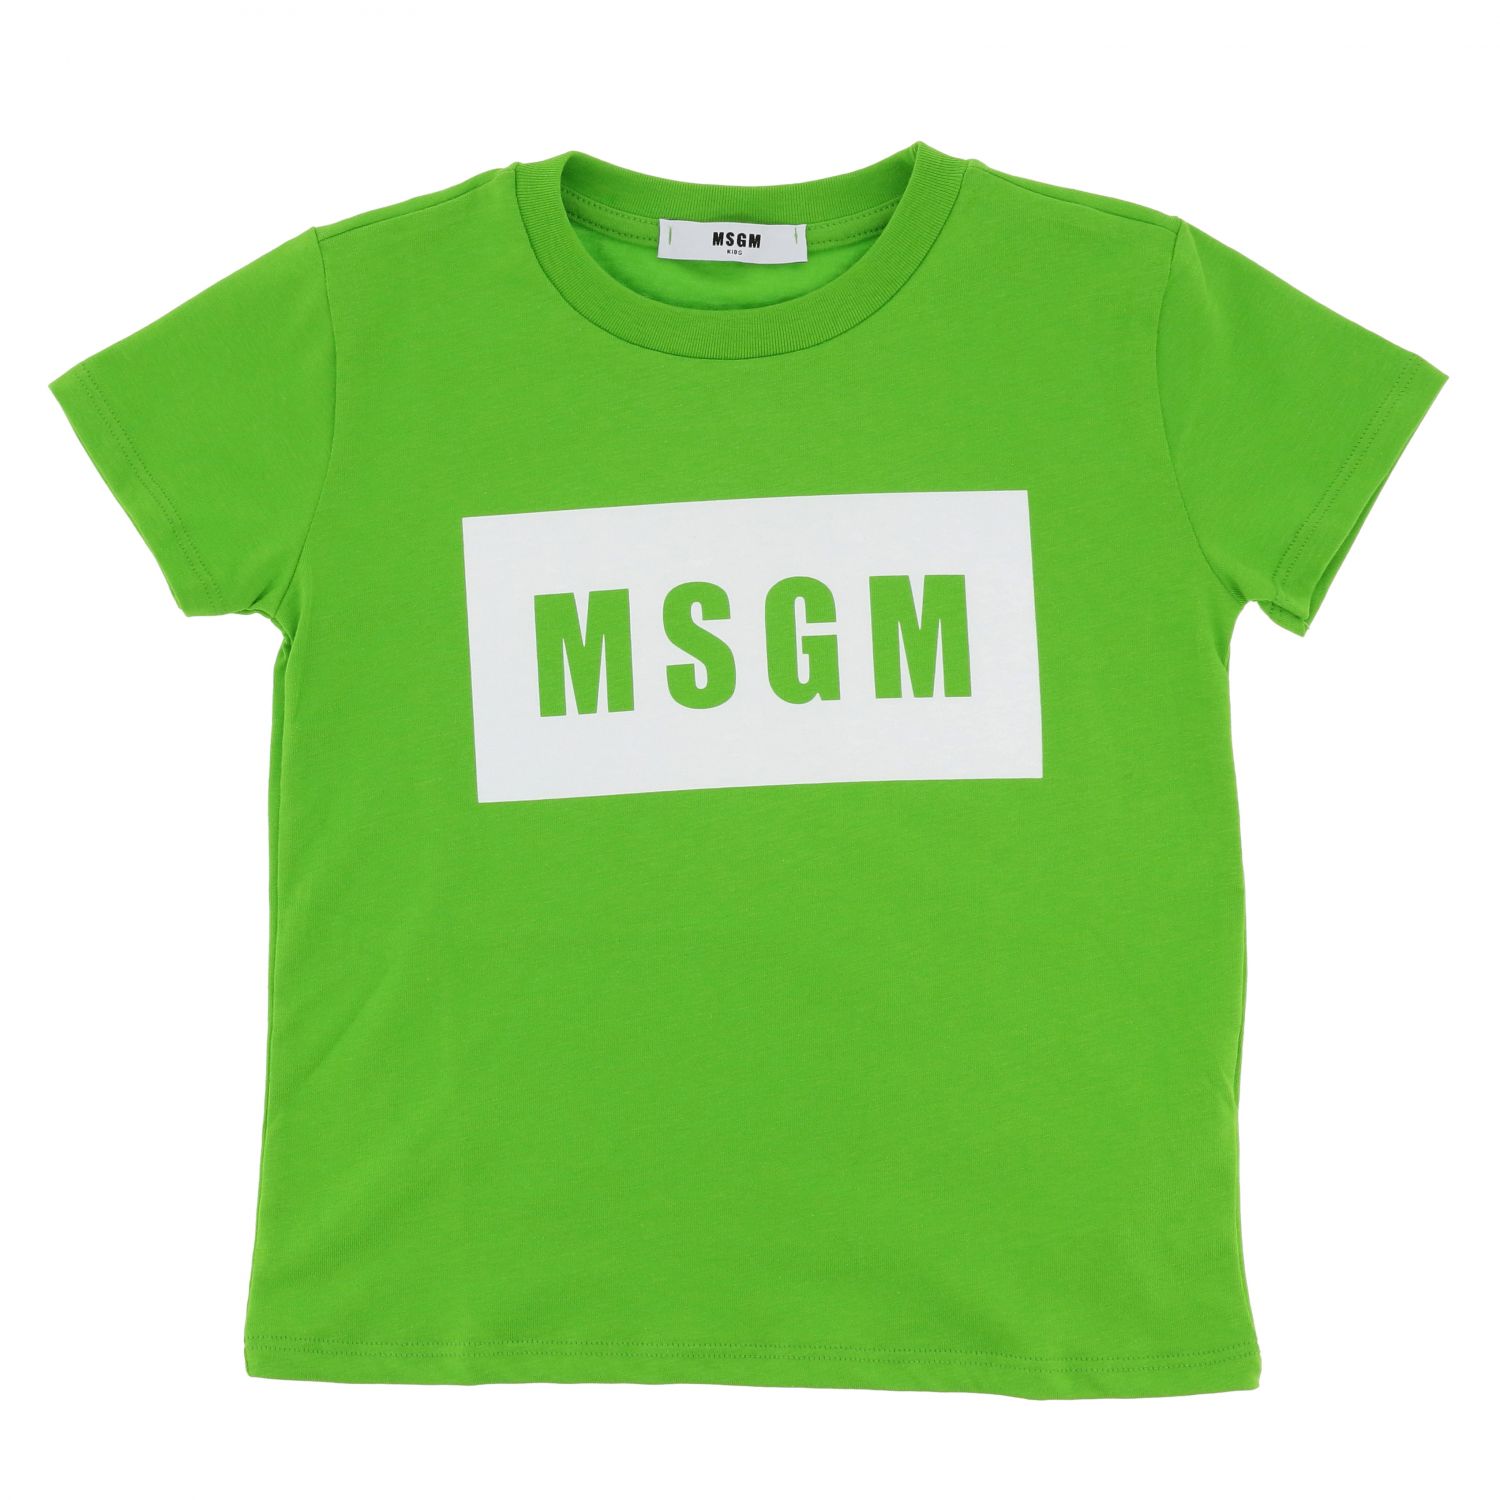 Msgm Kids Outlet: t-shirt for girls - Green | Msgm Kids t-shirt 9427 online on GIGLIO.COM